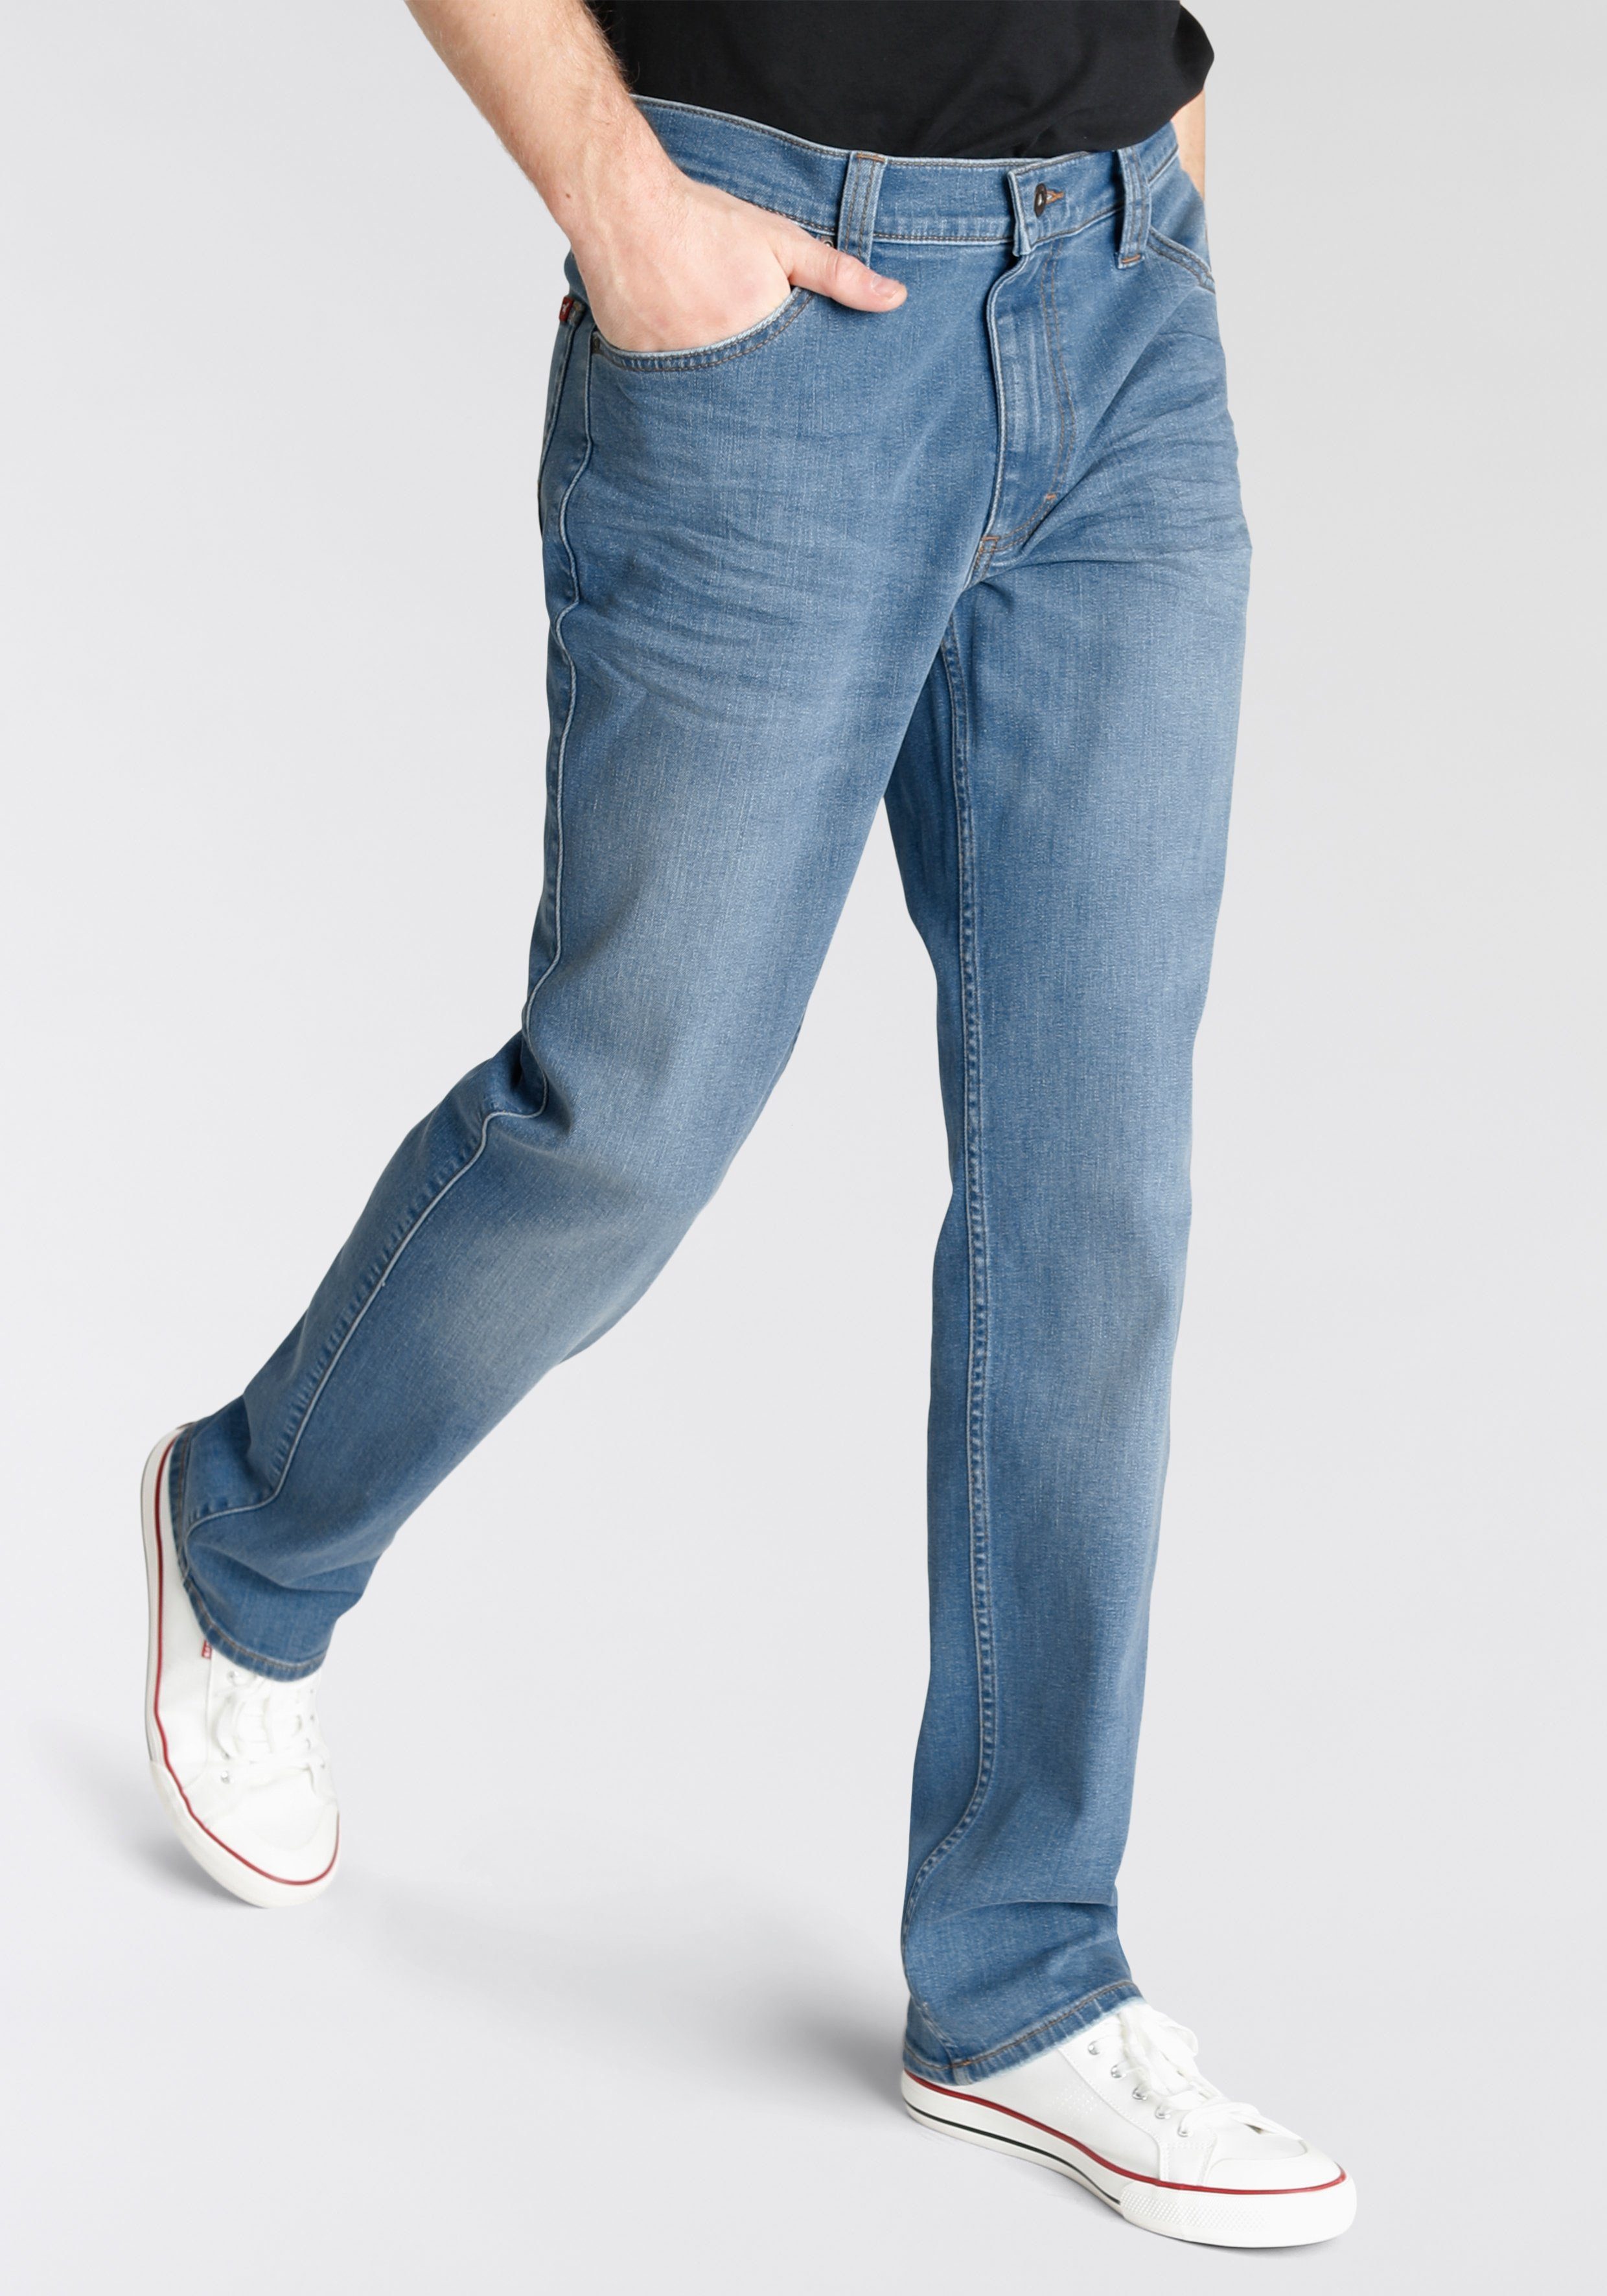 Style medium 5-Pocket-Jeans washed MUSTANG blue Tramper Straight